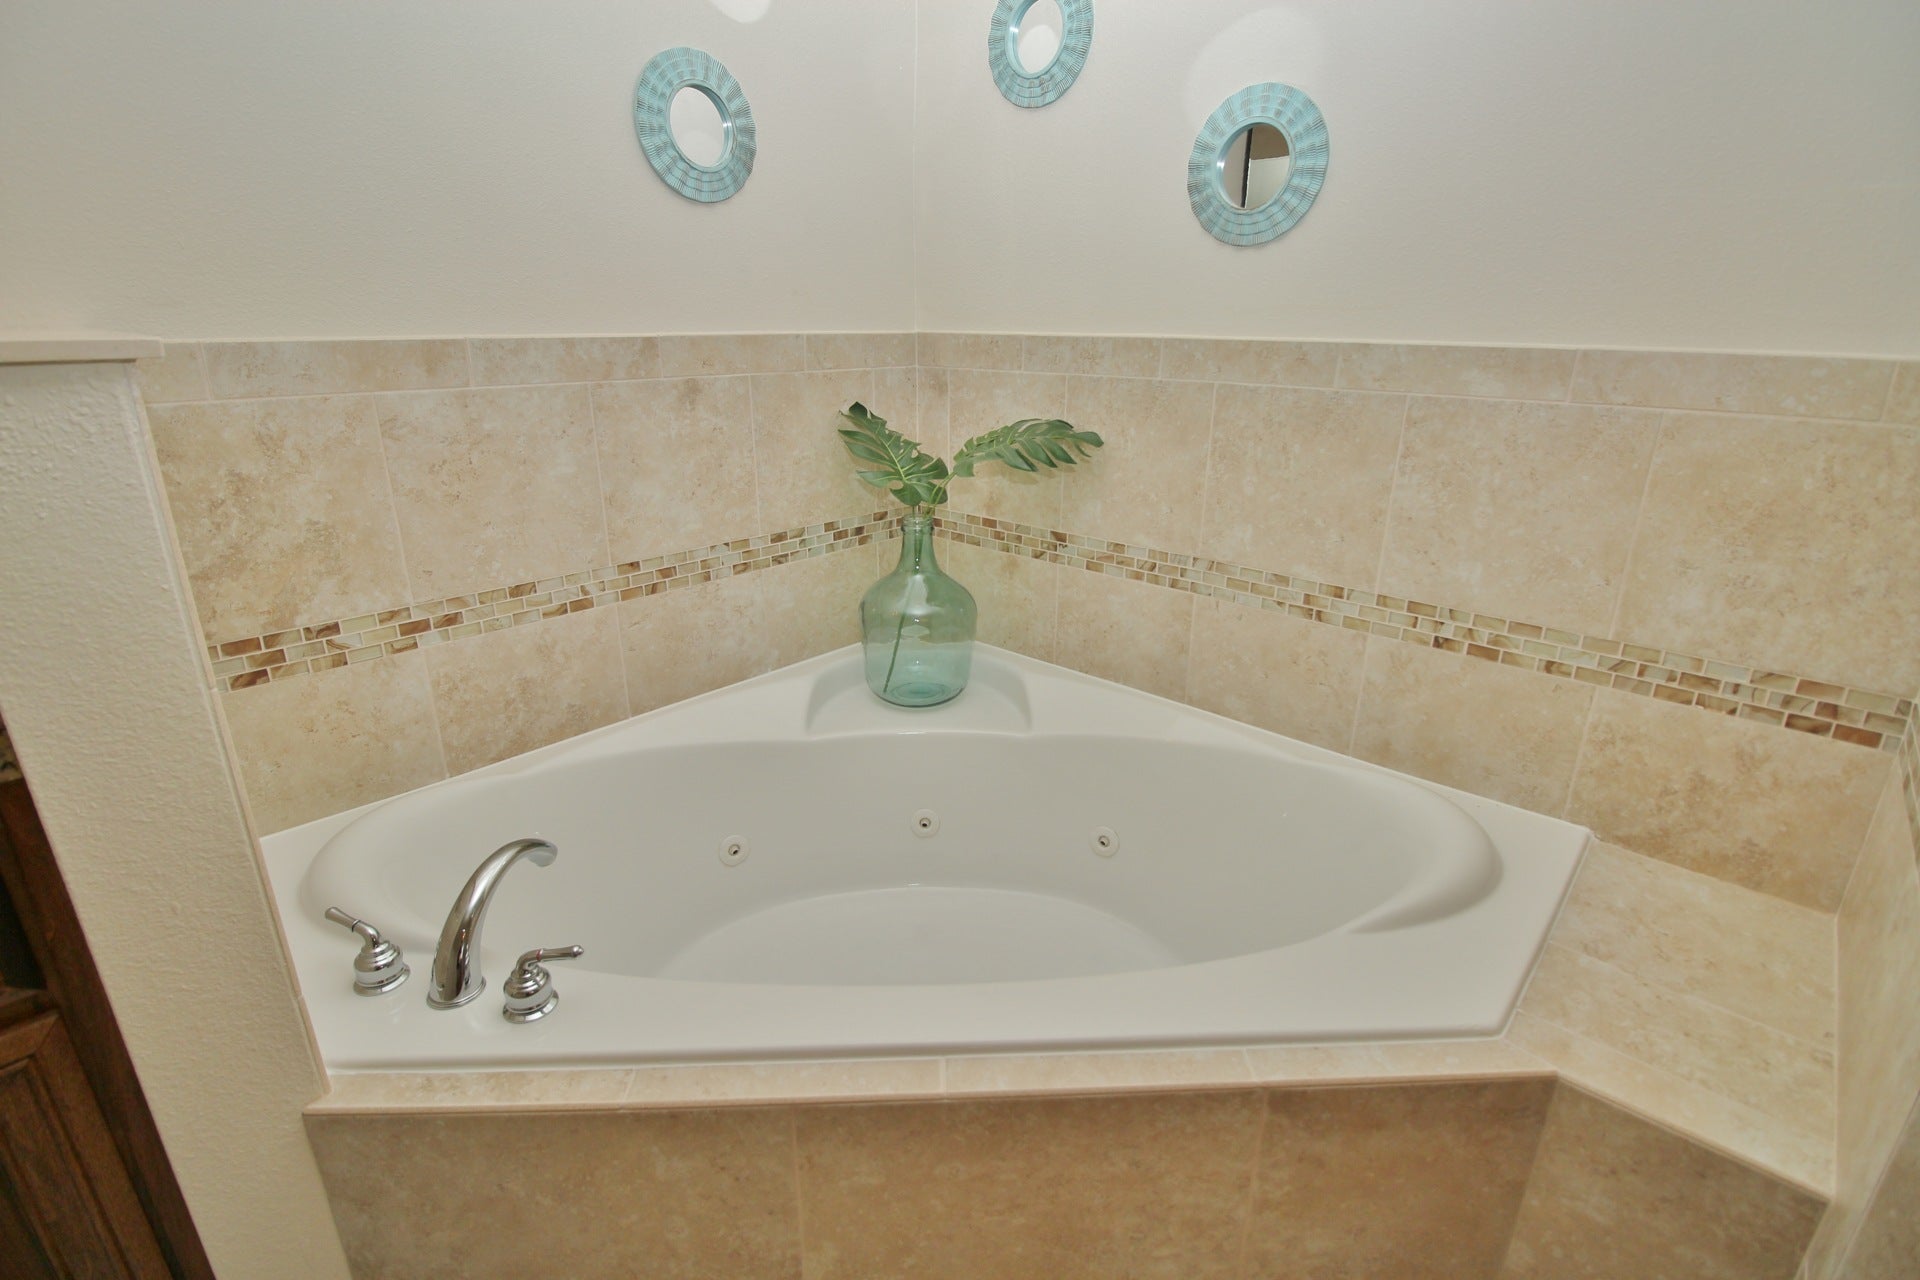 Unwind during your stay in this relaxing tub